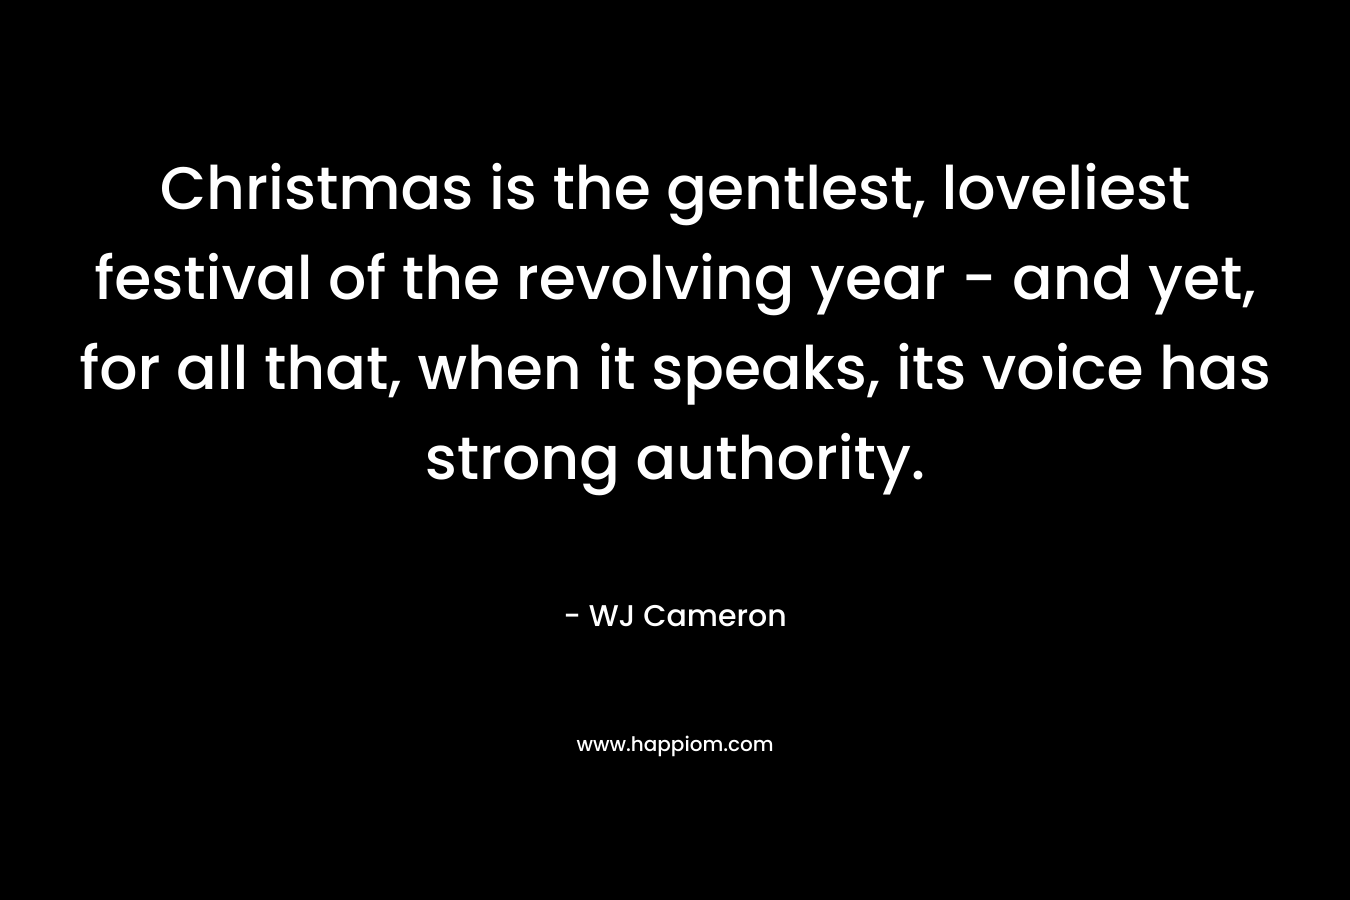 Christmas is the gentlest, loveliest festival of the revolving year – and yet, for all that, when it speaks, its voice has strong authority.  – WJ Cameron